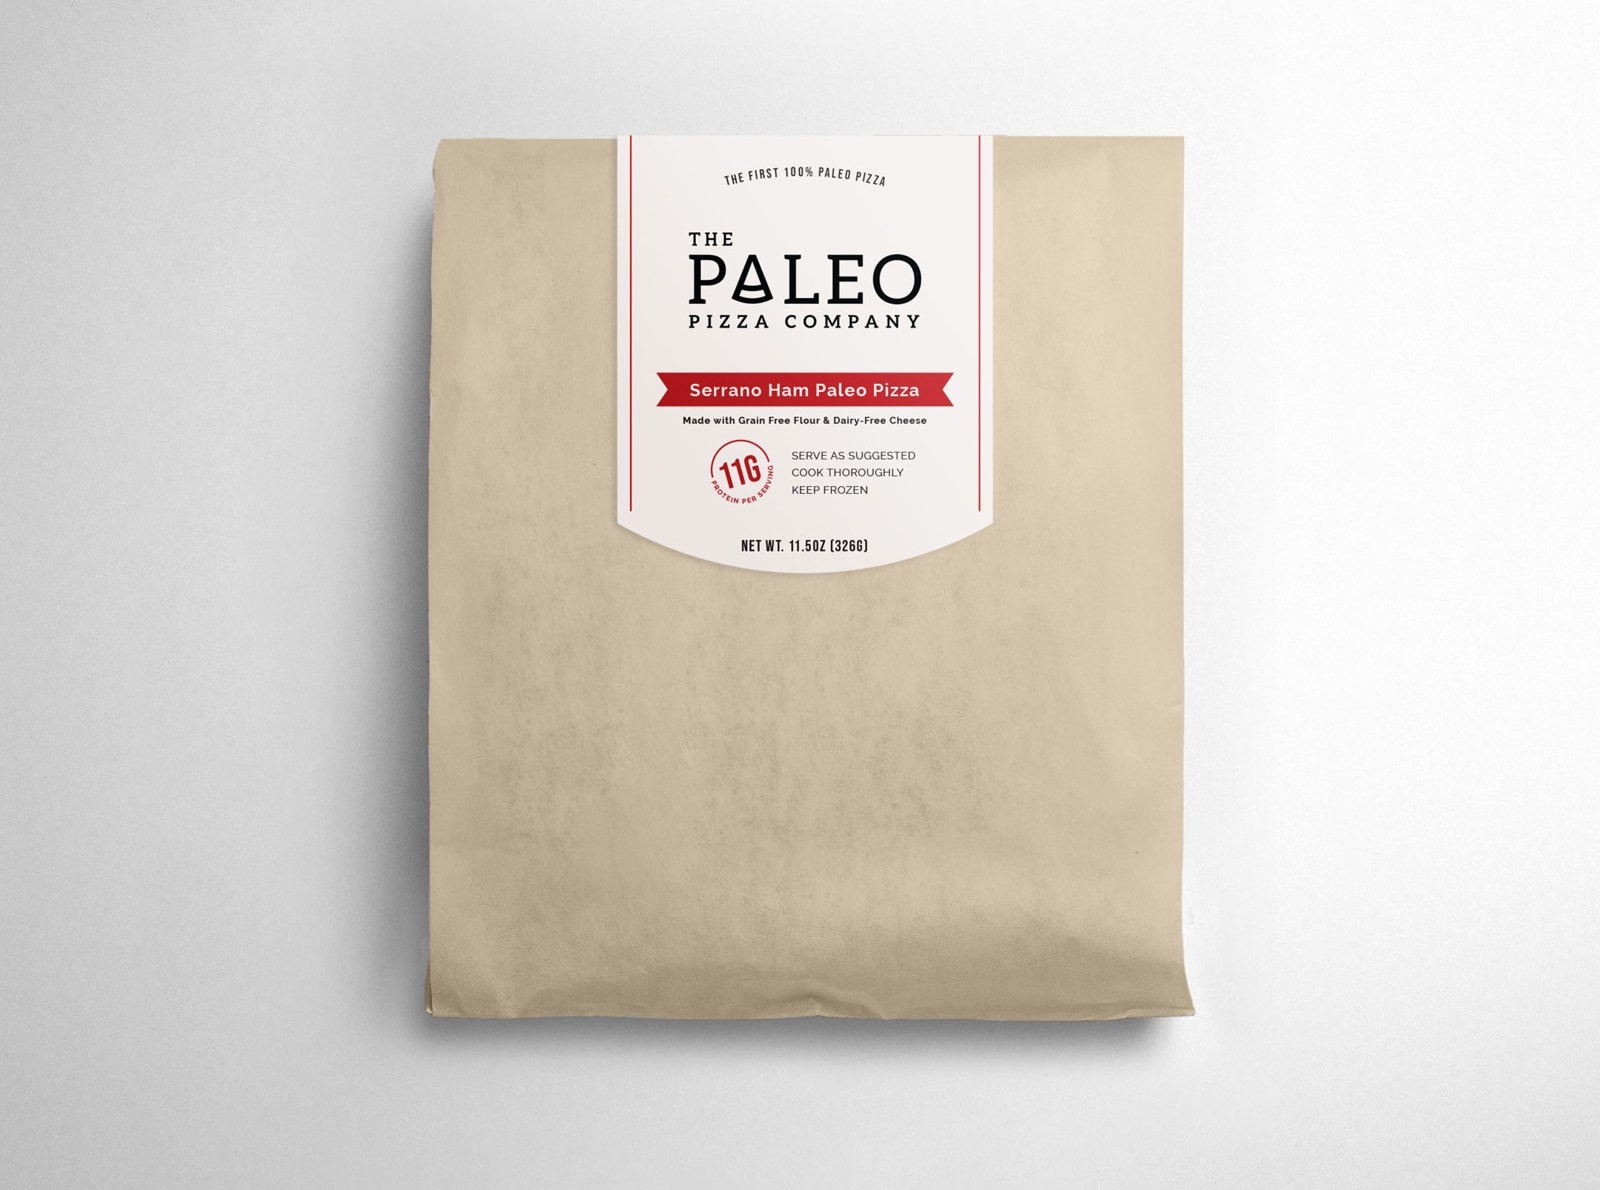 The Paleo Pizza Company packaging design in brown paper bag sealed with sticker label with logo and product description.